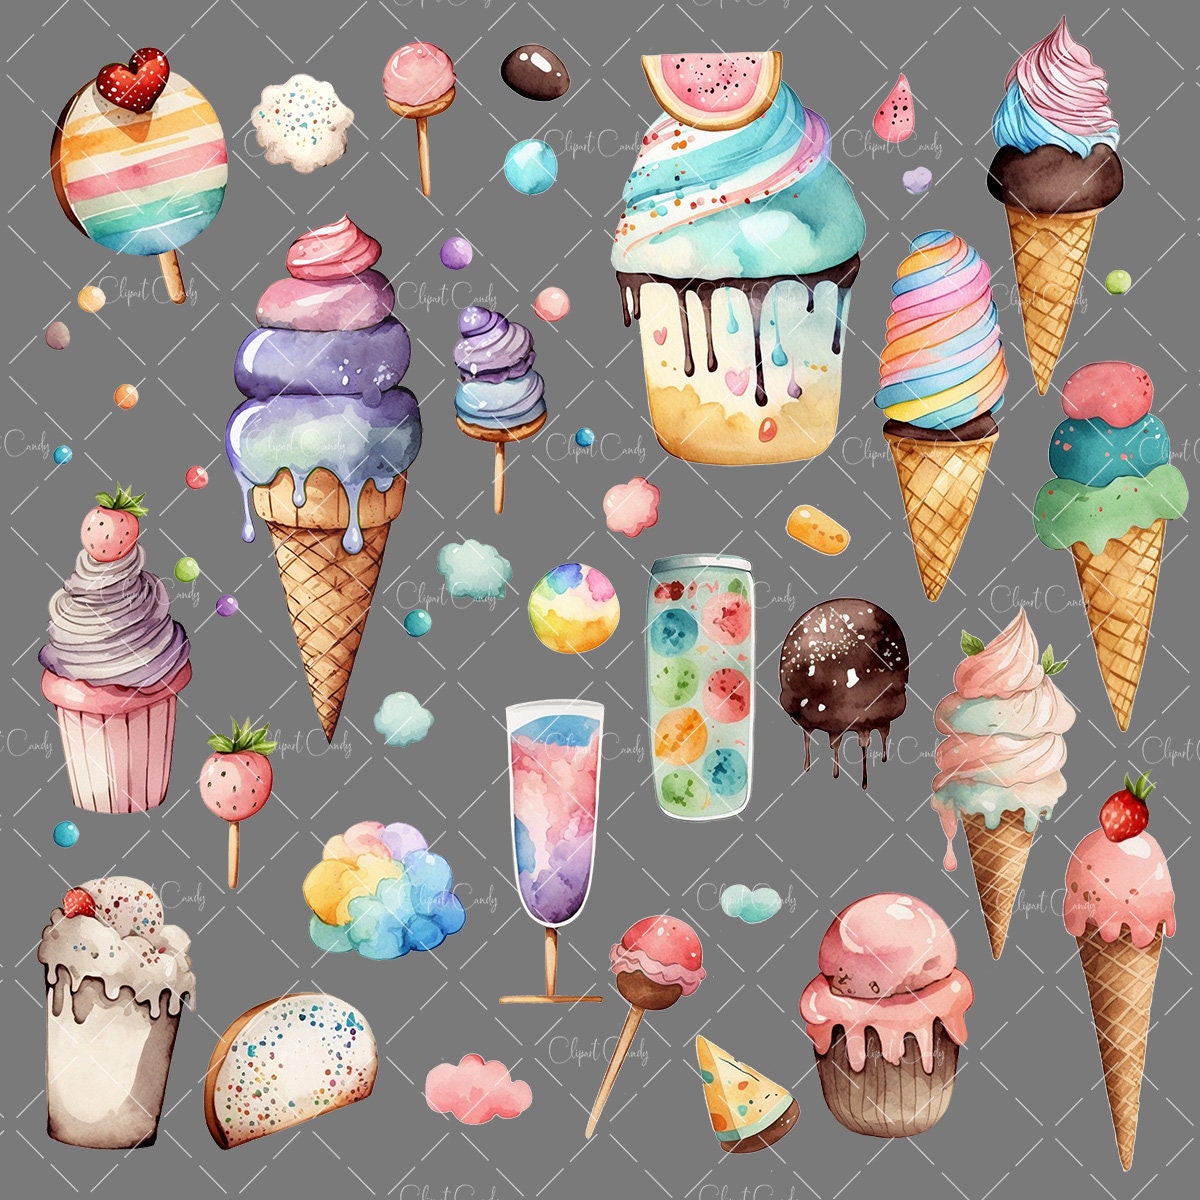 Sweets Clipart, Candy Clipart, Ice Cream Clipart, Candy Shop Clipart, Bakery Shop Clipart, CLP01 - Candy Jar Studios